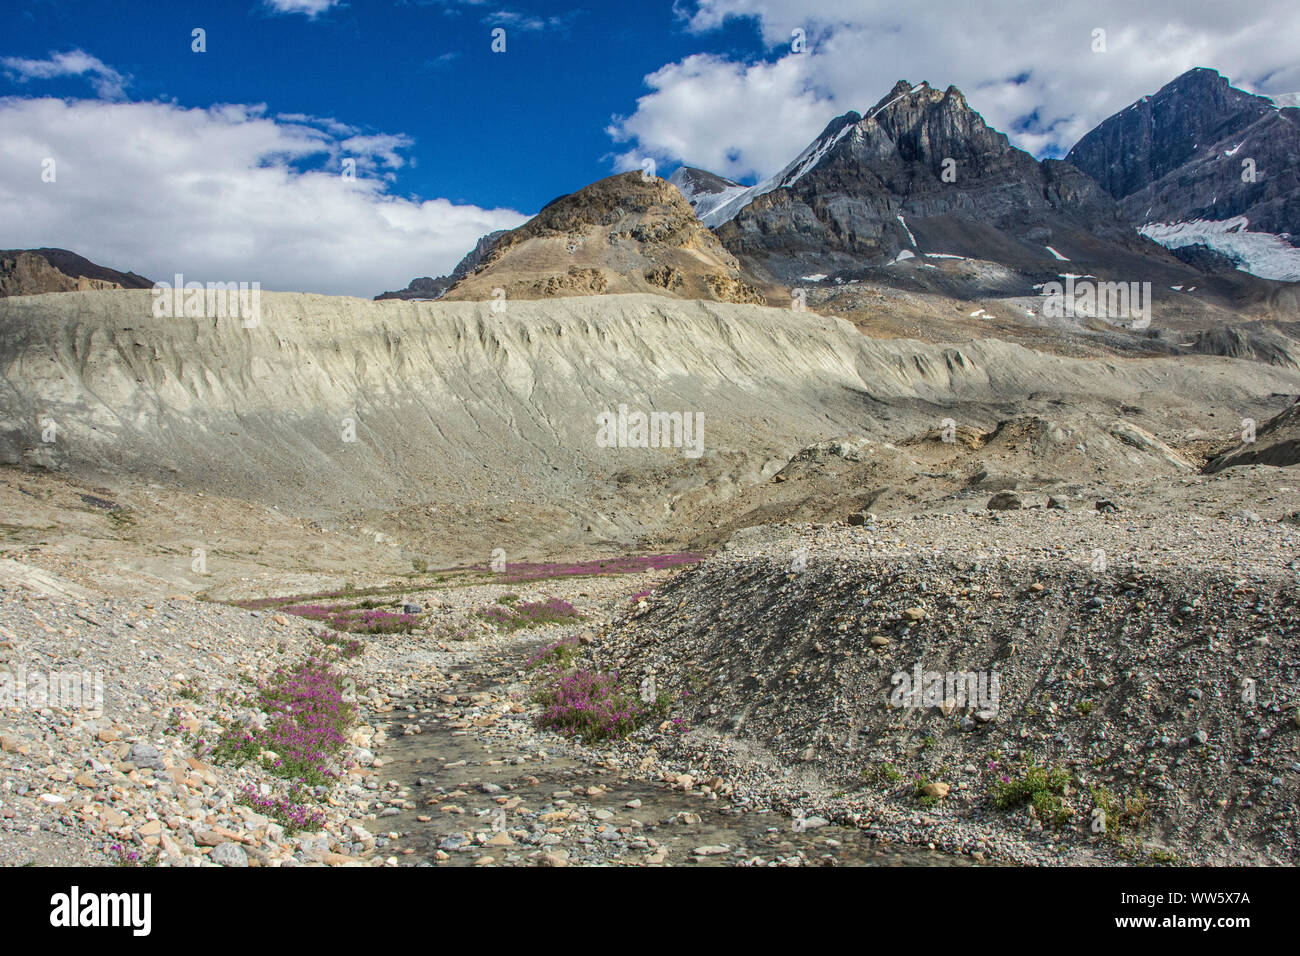 Dry riverbed with flowers in the Columbia Icefield, Rocky Mountains, Canada Stock Photo